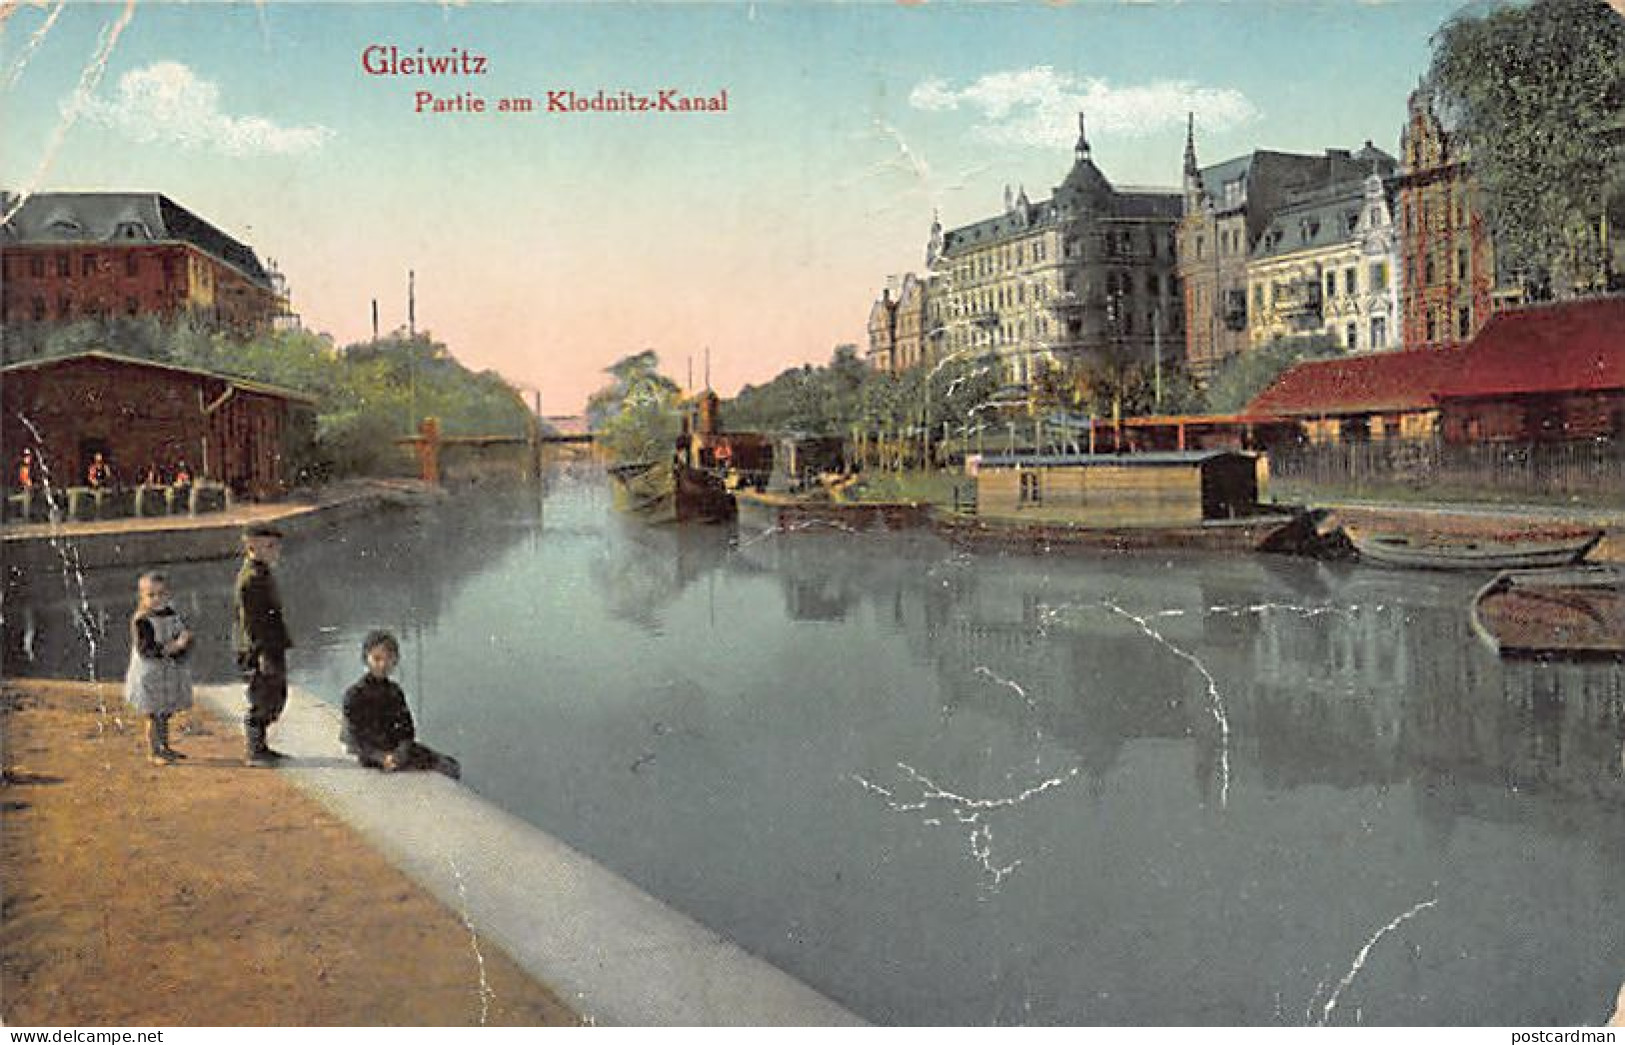 Poland - GLIWICE Gleiwitz - Partie Am Klodnitz-Kanal - SEE SCANS FOR CONDITION - Publ. Unknown  - Pologne